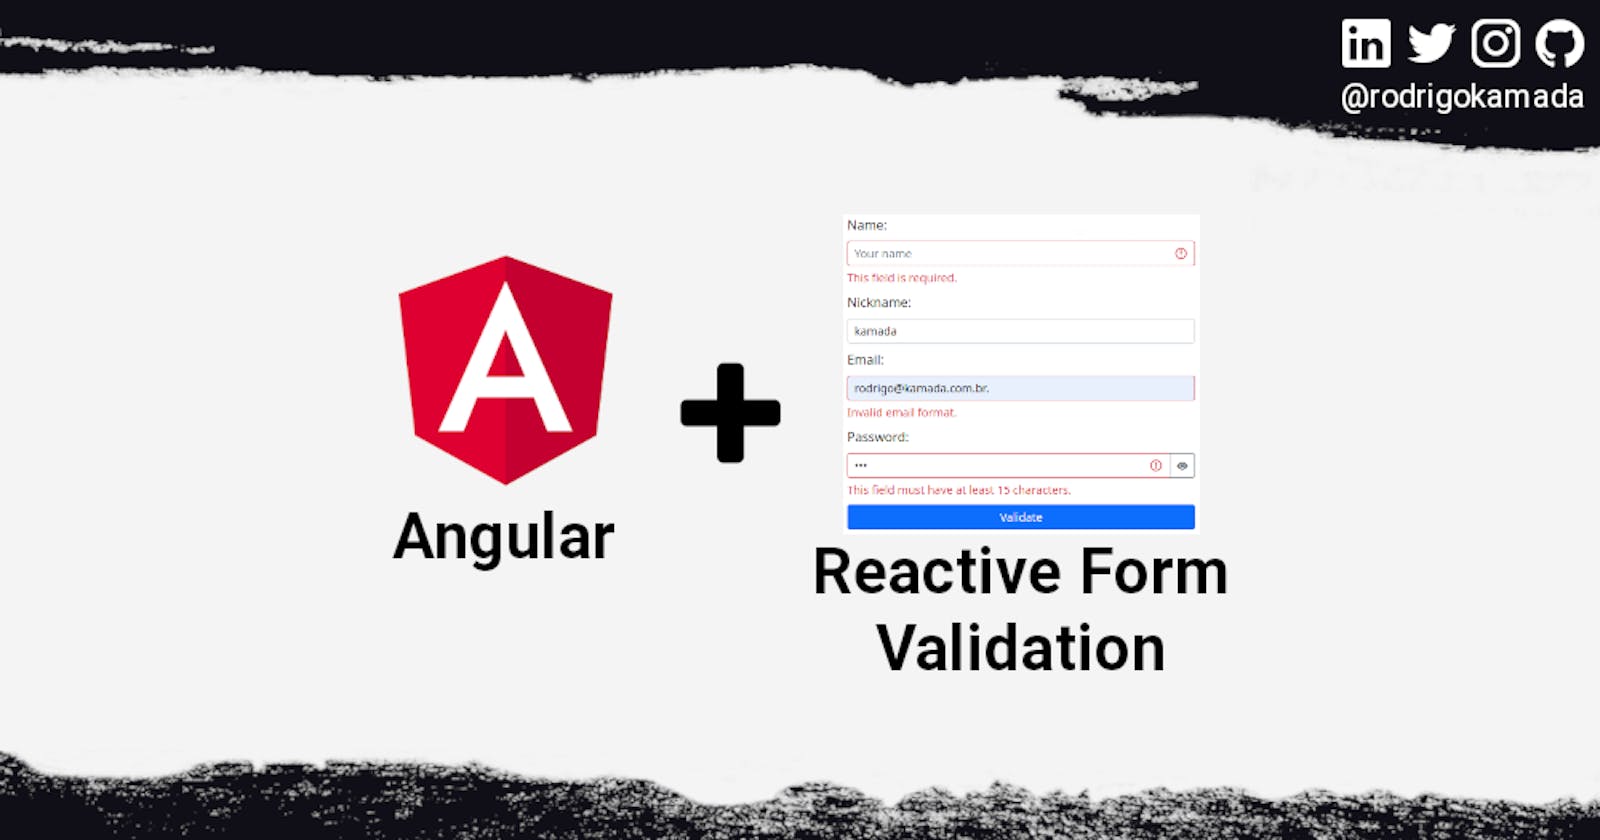 Creating and validating a reactive form to an Angular application